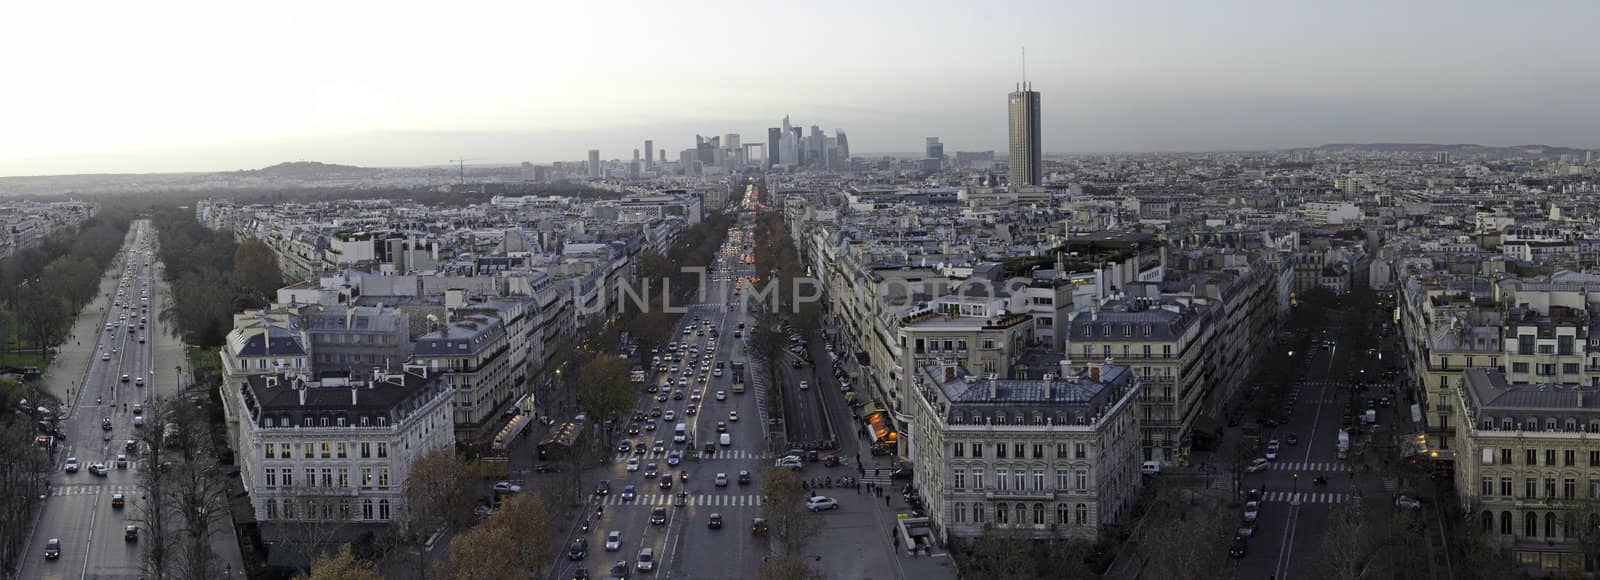 Panoramic view of Paris from Triumph Arc by jovannig